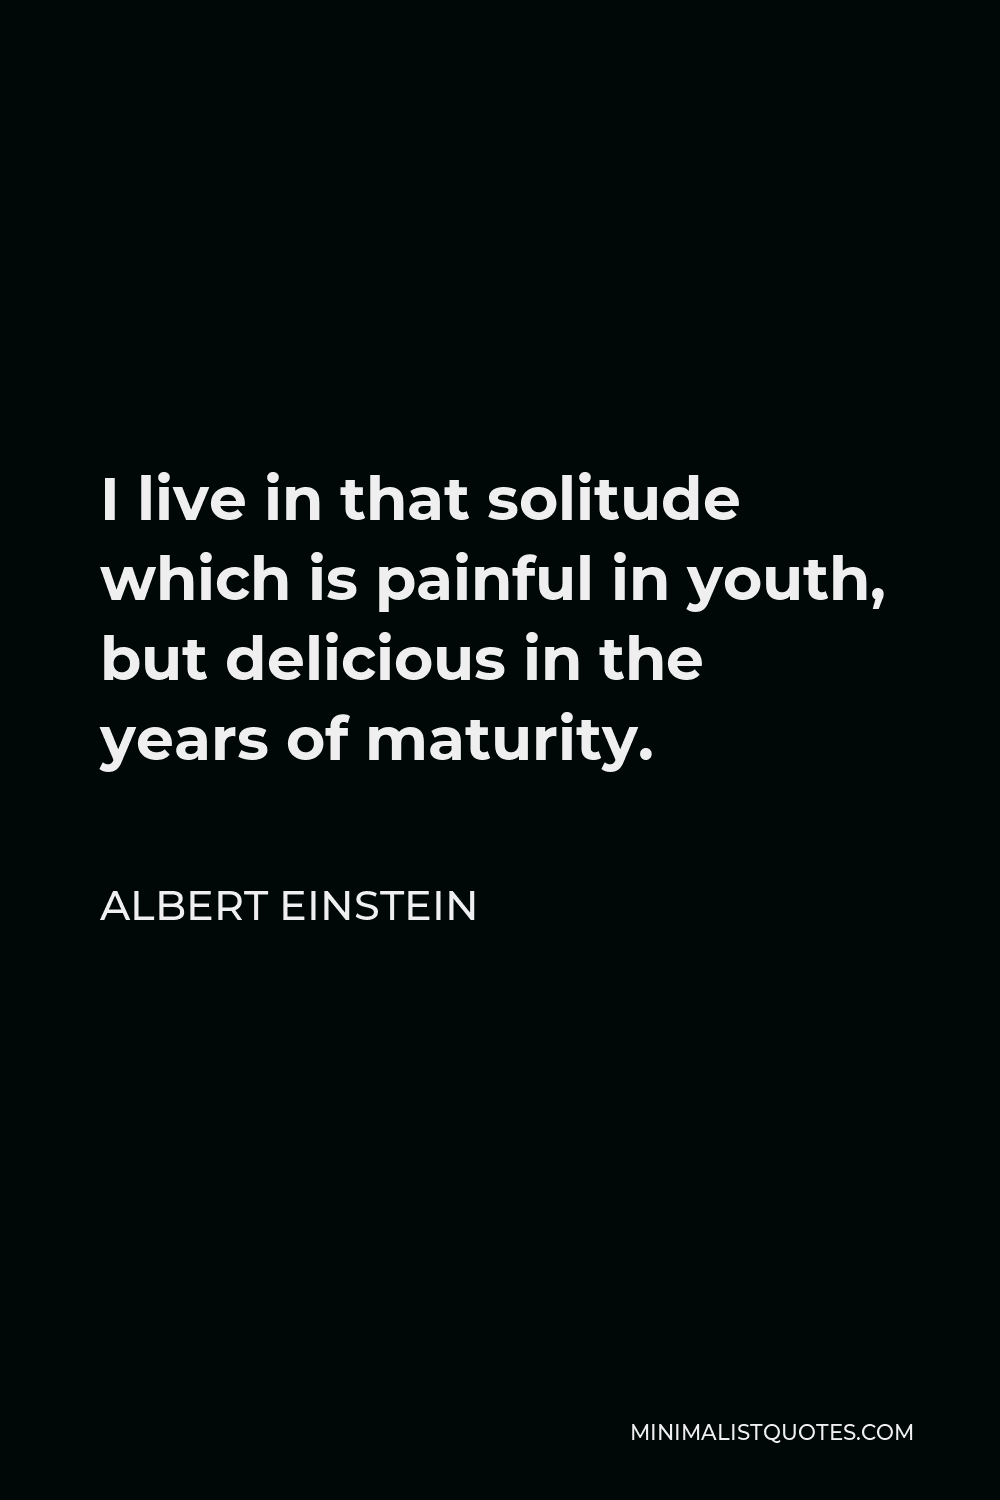 Albert Einstein Quote - I live in that solitude which is painful in youth, but delicious in the years of maturity.